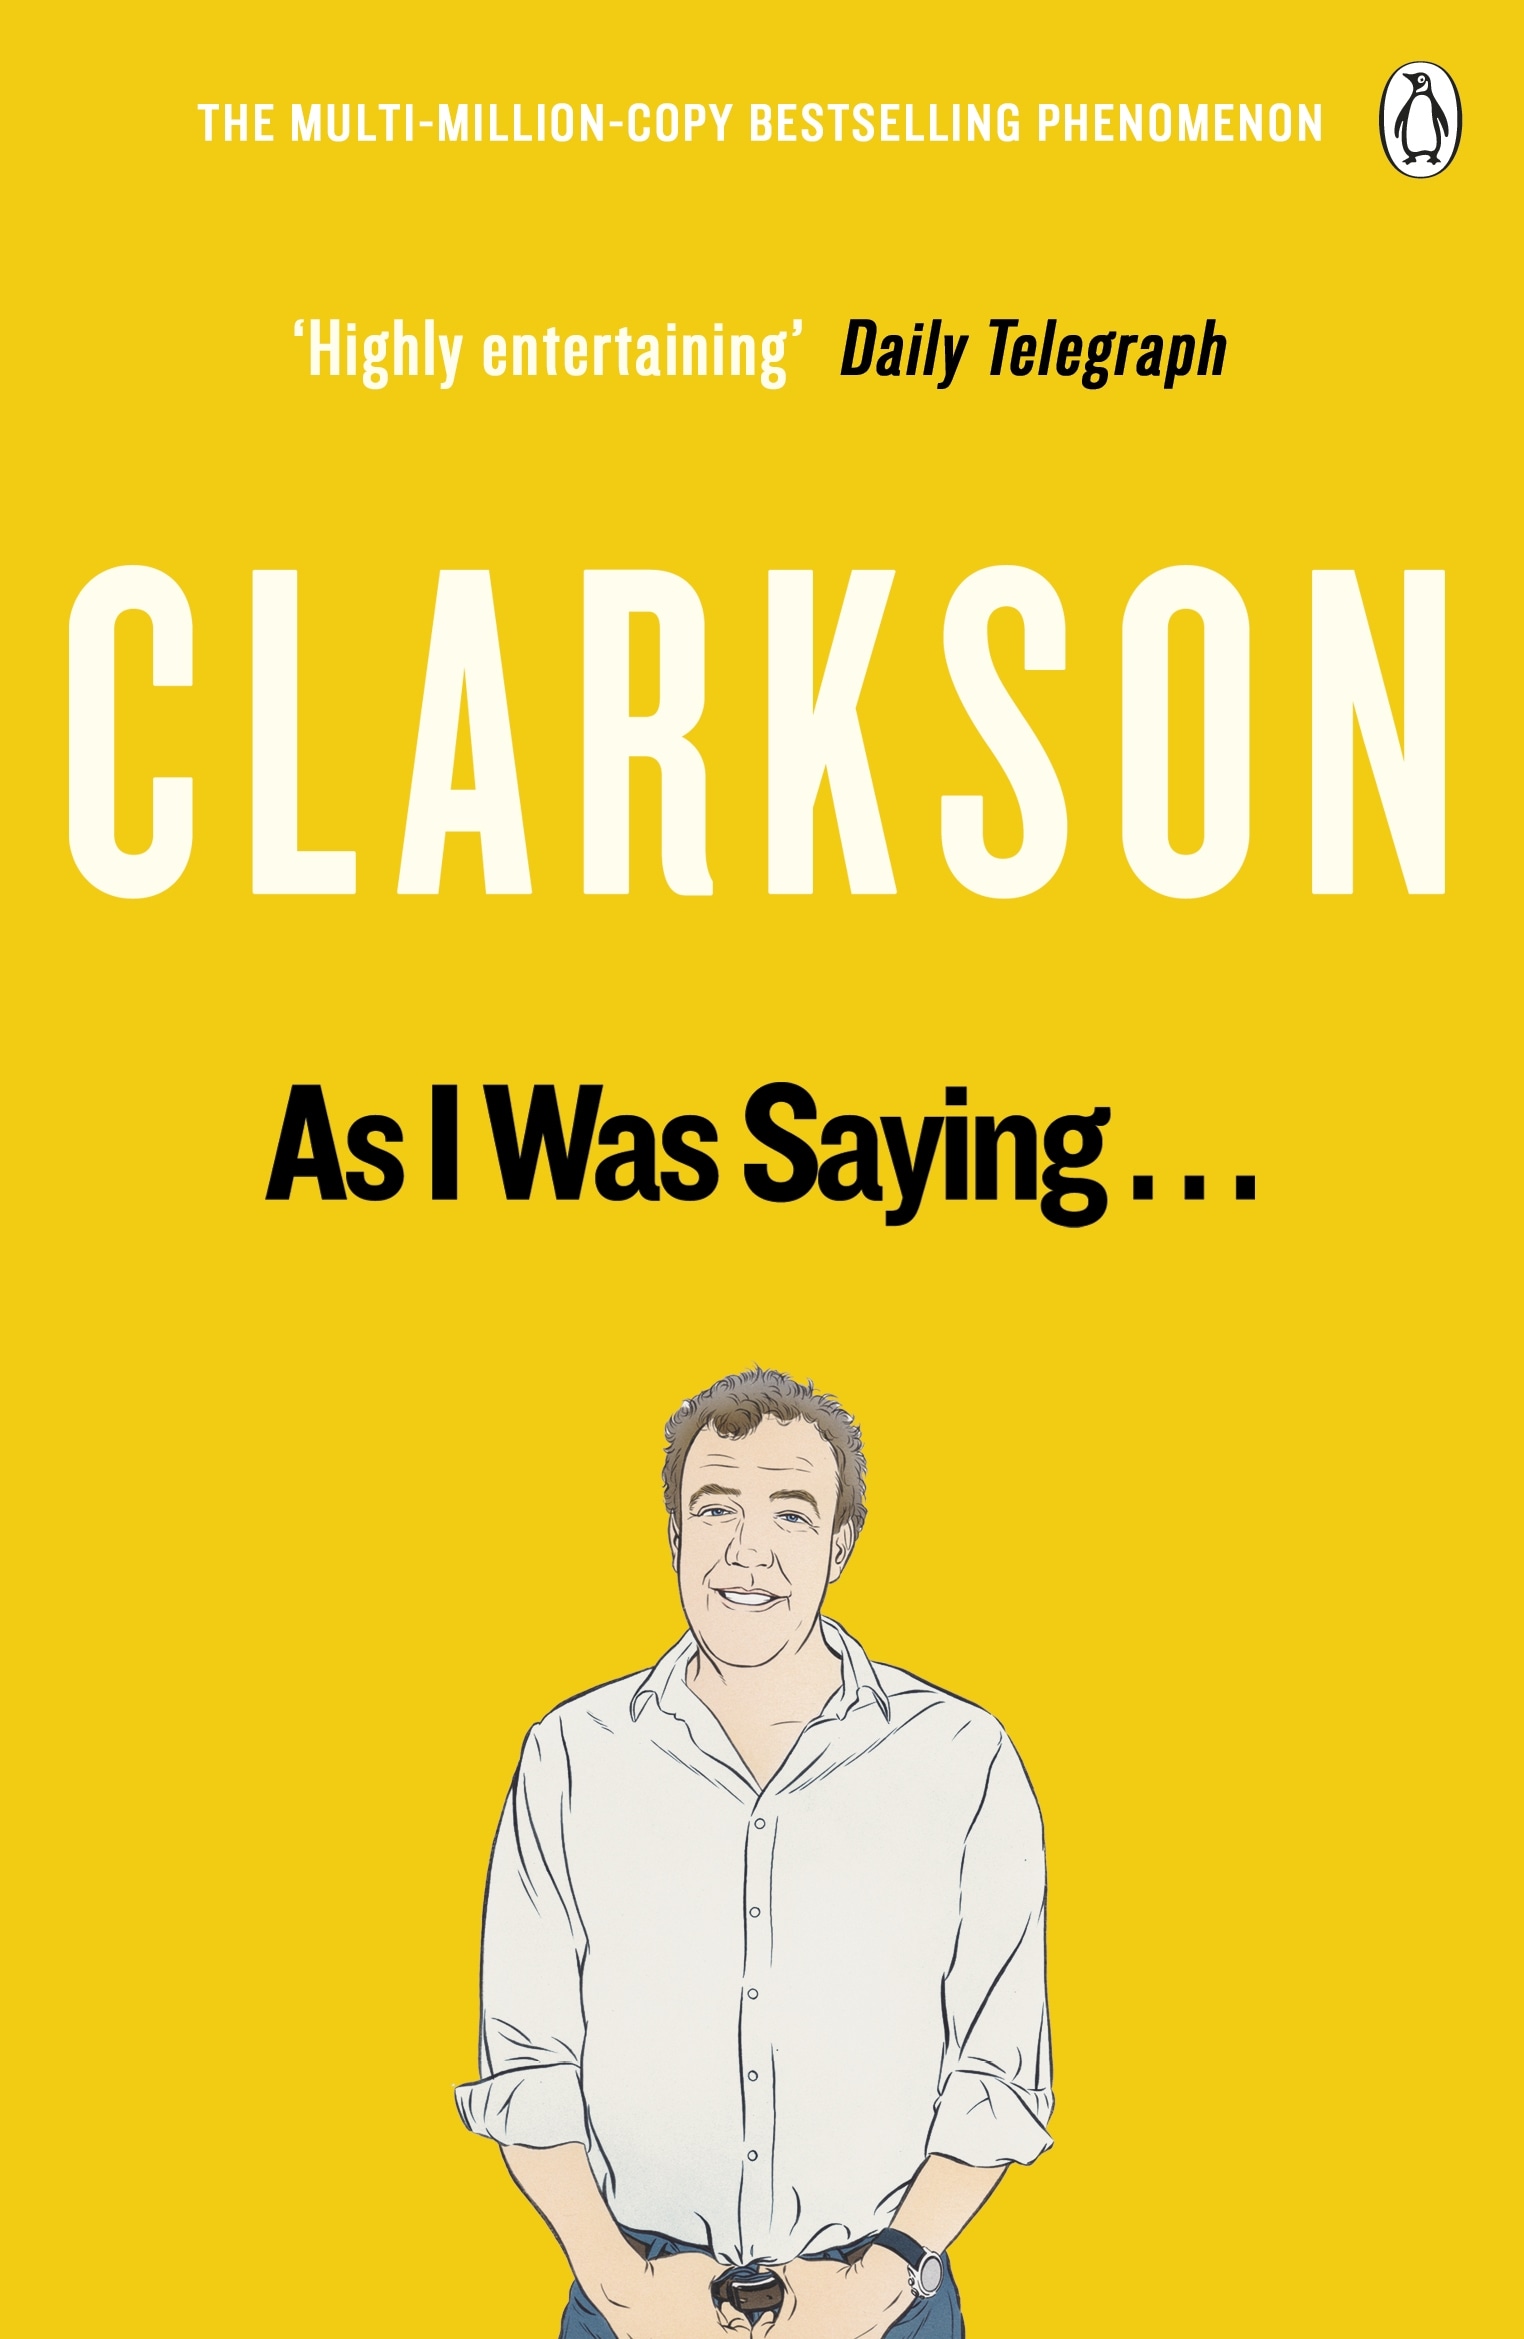 Book “As I Was Saying . . .” by Jeremy Clarkson — May 19, 2016